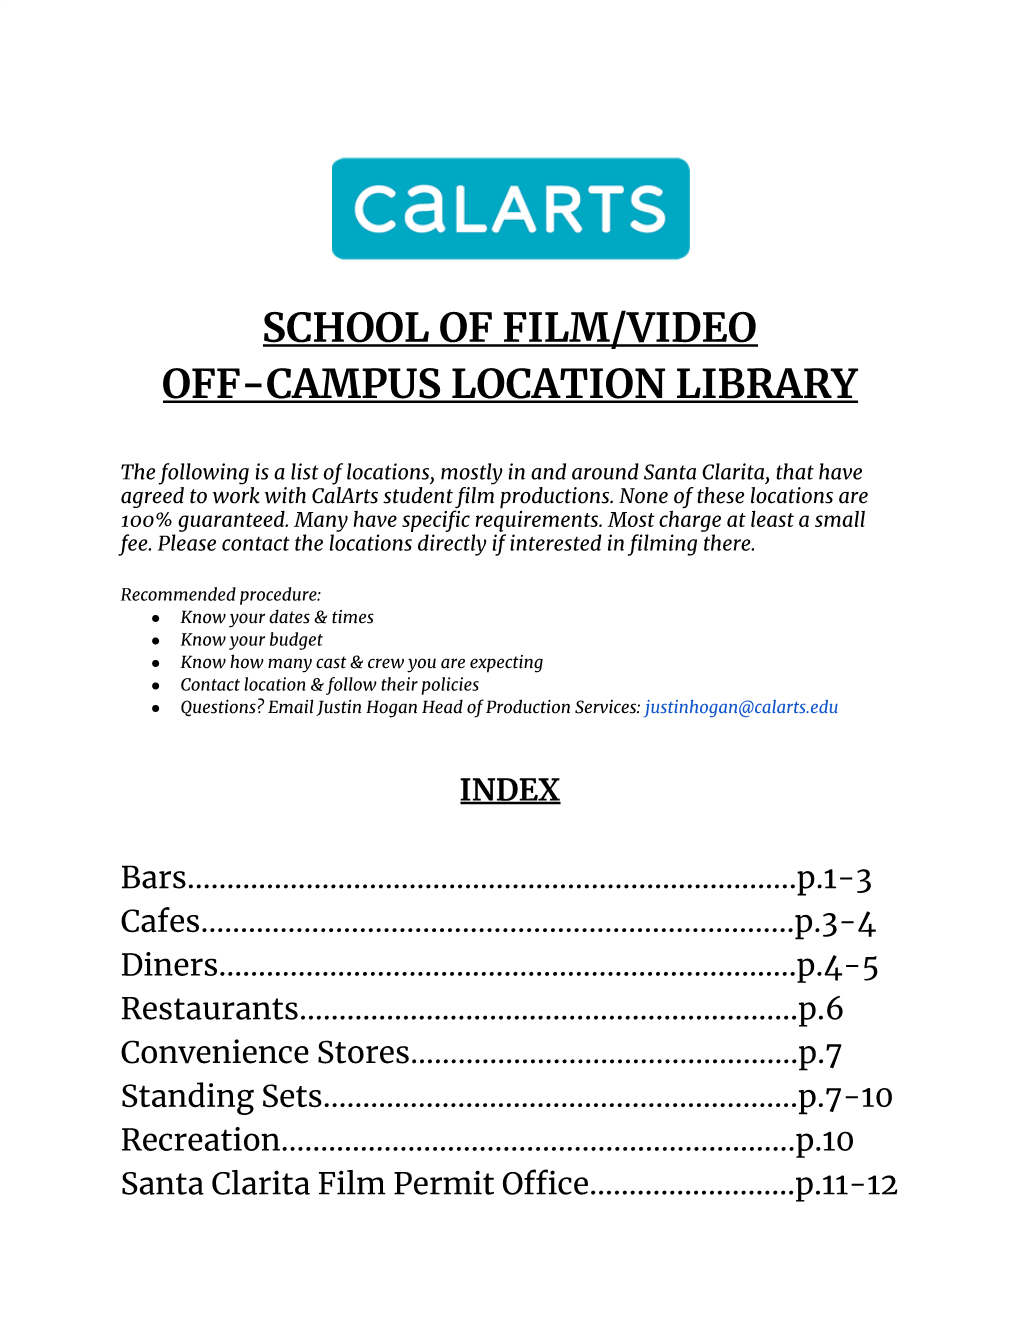 School of Film/Video Off-Campus Location Library